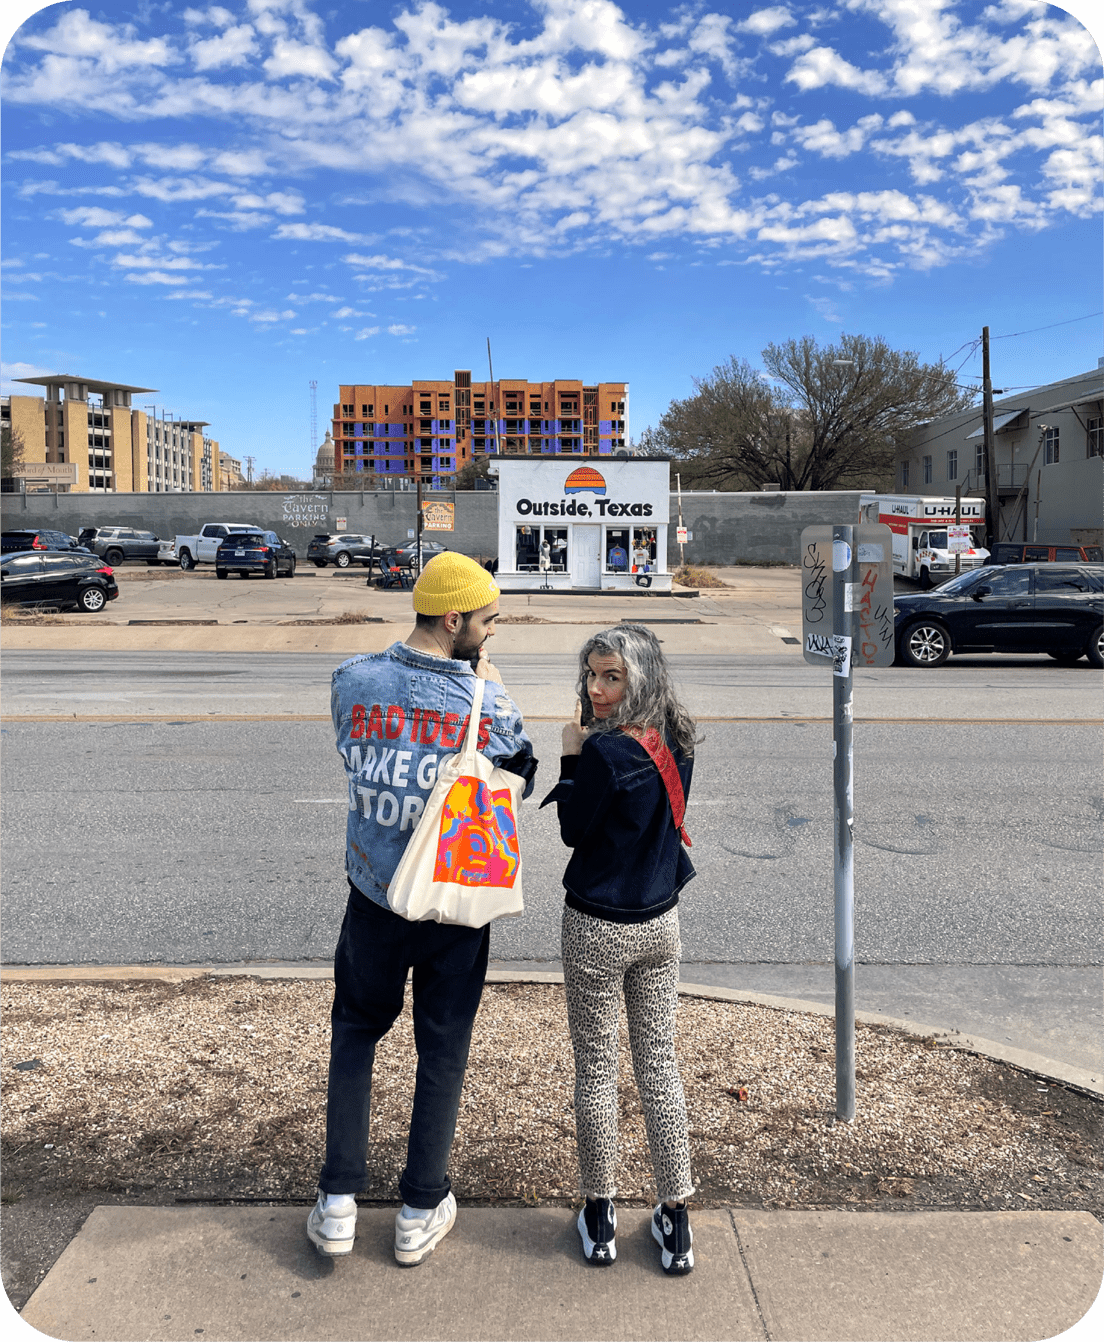 Nick Tetrault and Kristen Hughes are seen standing on a sidewalk in Austin, Texas, facing away from the camera, looking back over their shoulders. Nick is on the left, wearing a yellow beanie and a denim jacket with bold red text that reads "BAD IDEAS MAKE GOOD STORIES." Kristen, on the right, has curly gray hair and is wearing a dark jacket with leopard print pants. There is a small building in the background labeled "Outside, Texas," and a partly cloudy sky overhead.